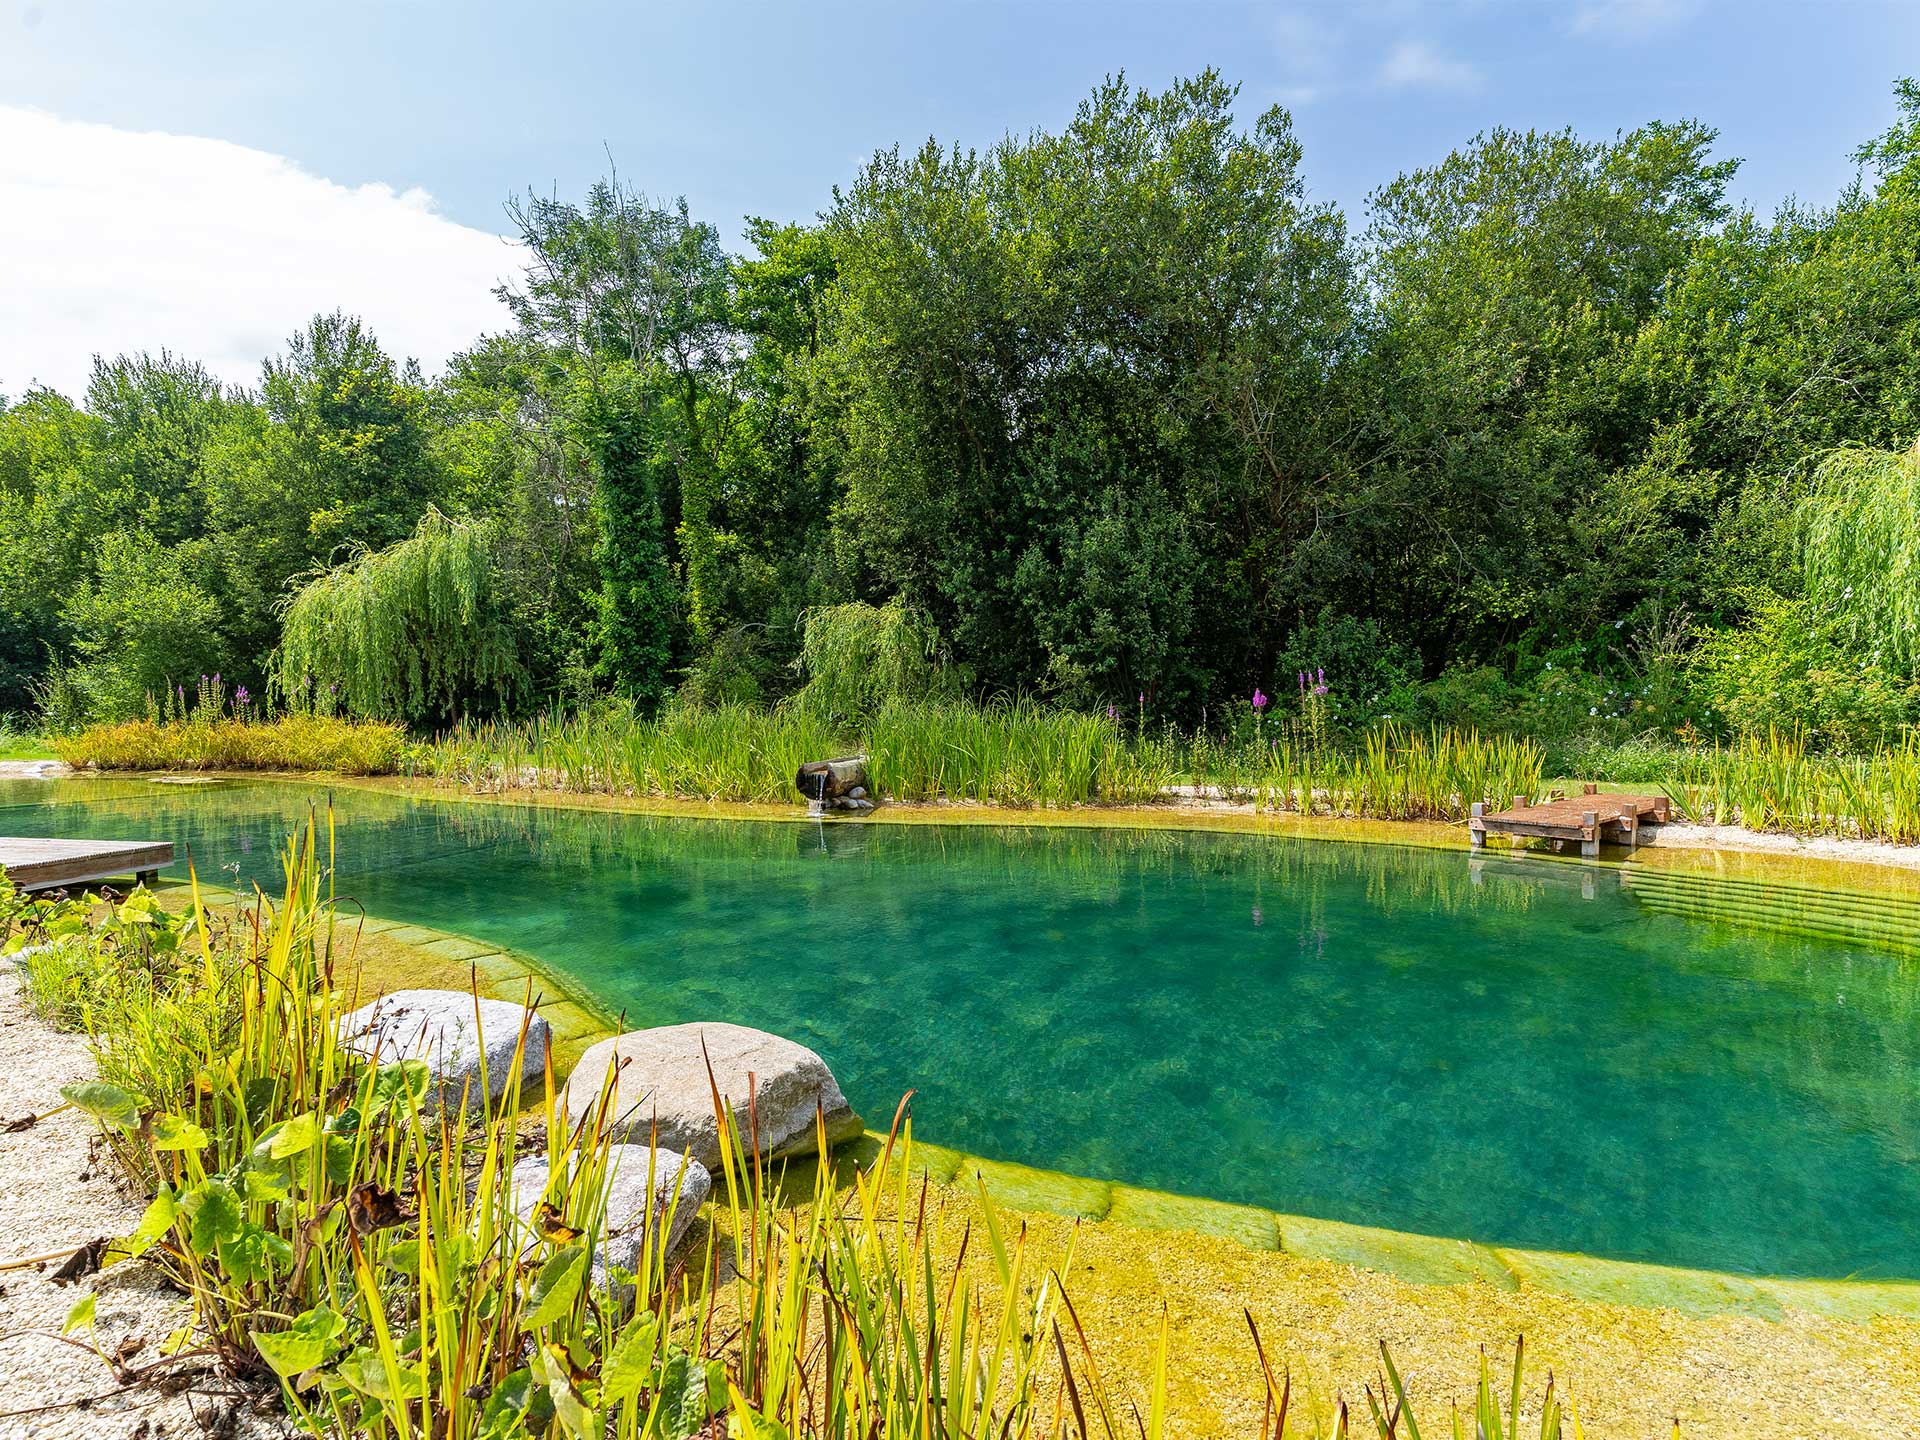 Unlike regular swimming pools, natural swimming pools don't use any chemicals